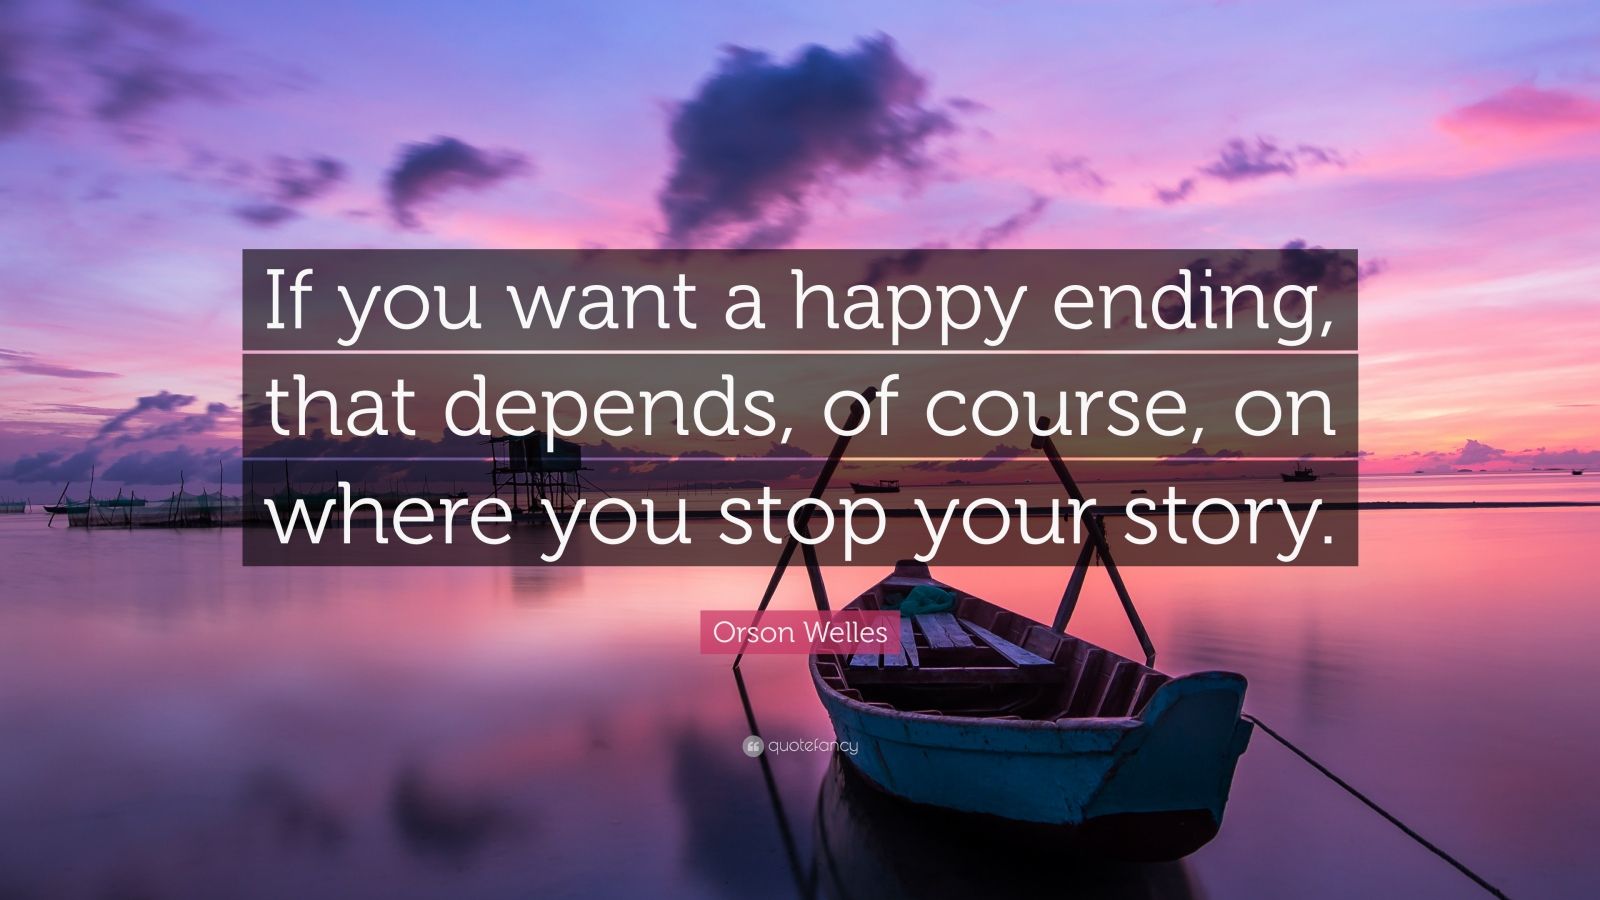 Orson Welles Quote: “If you want a happy ending, that depends, of